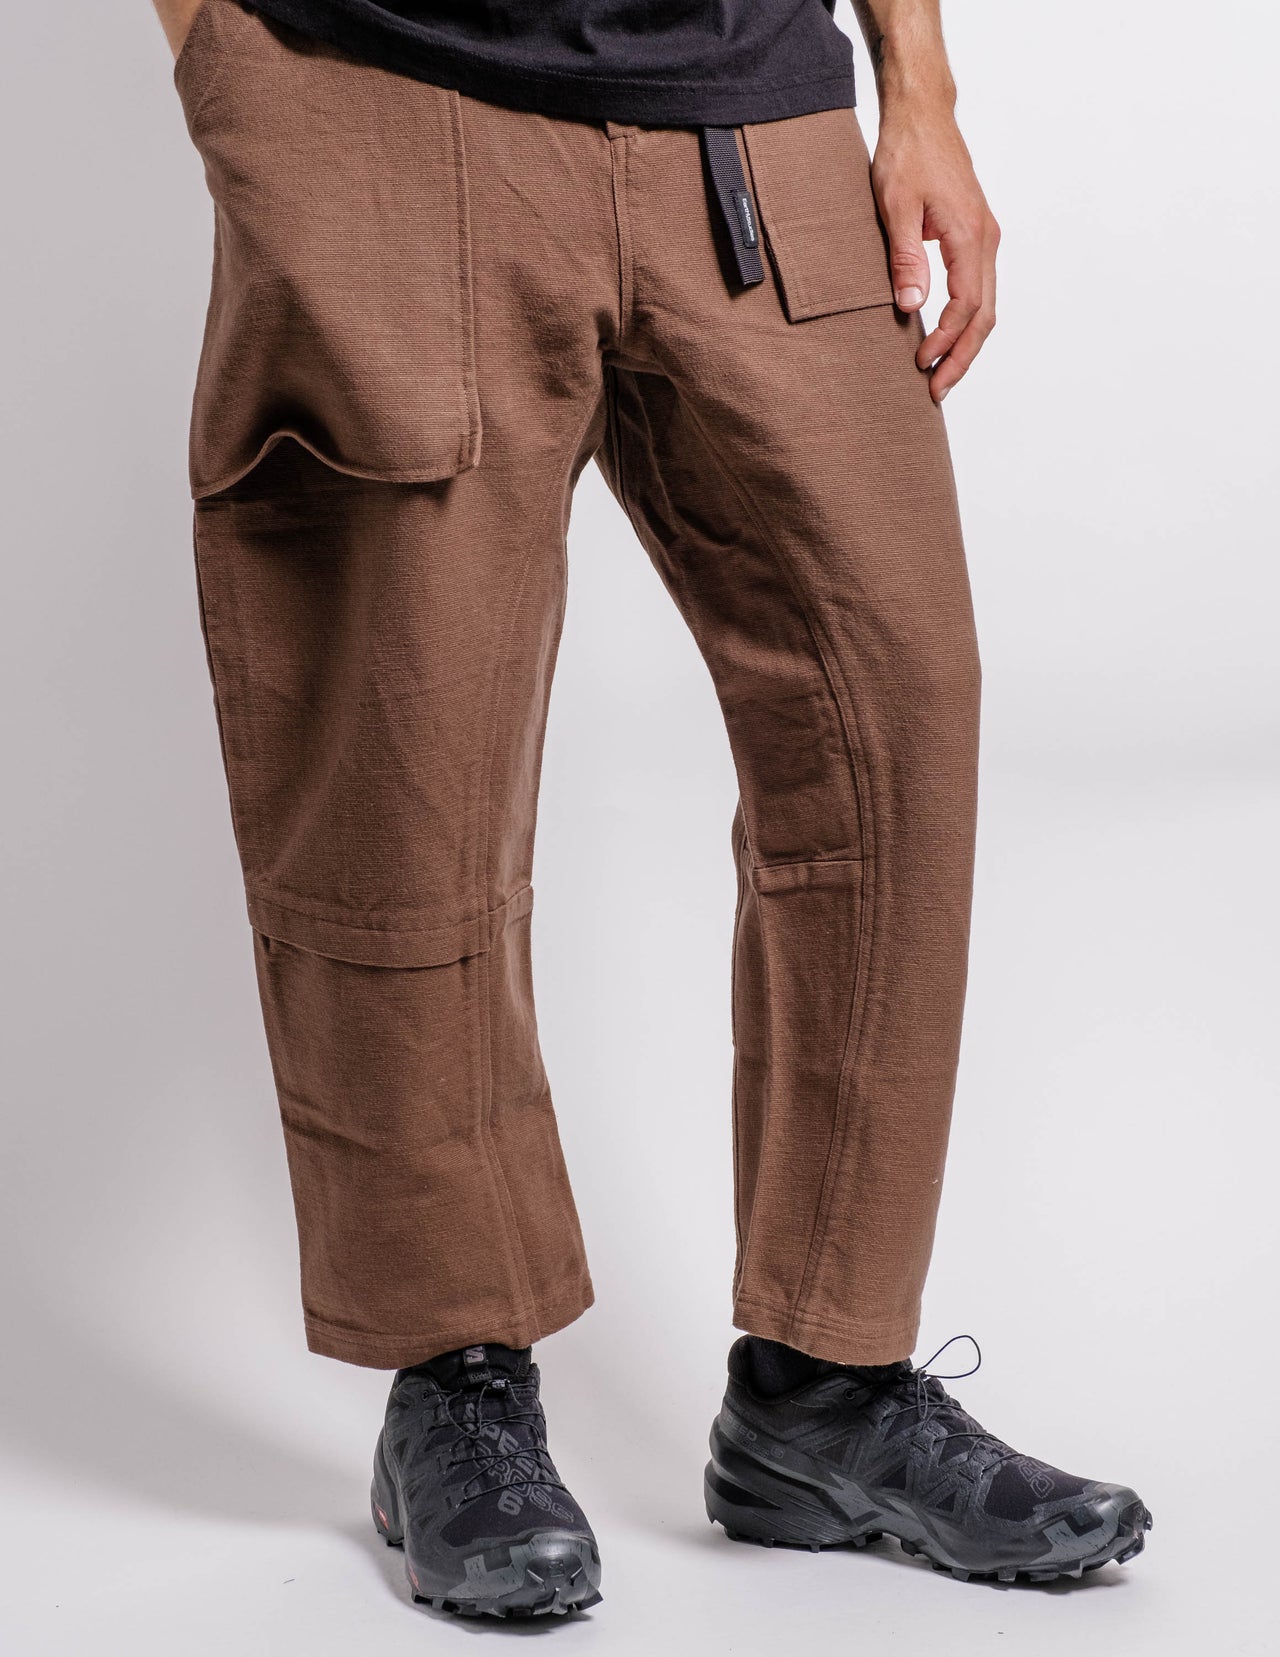 MP-103 Field Pant in Chestnut